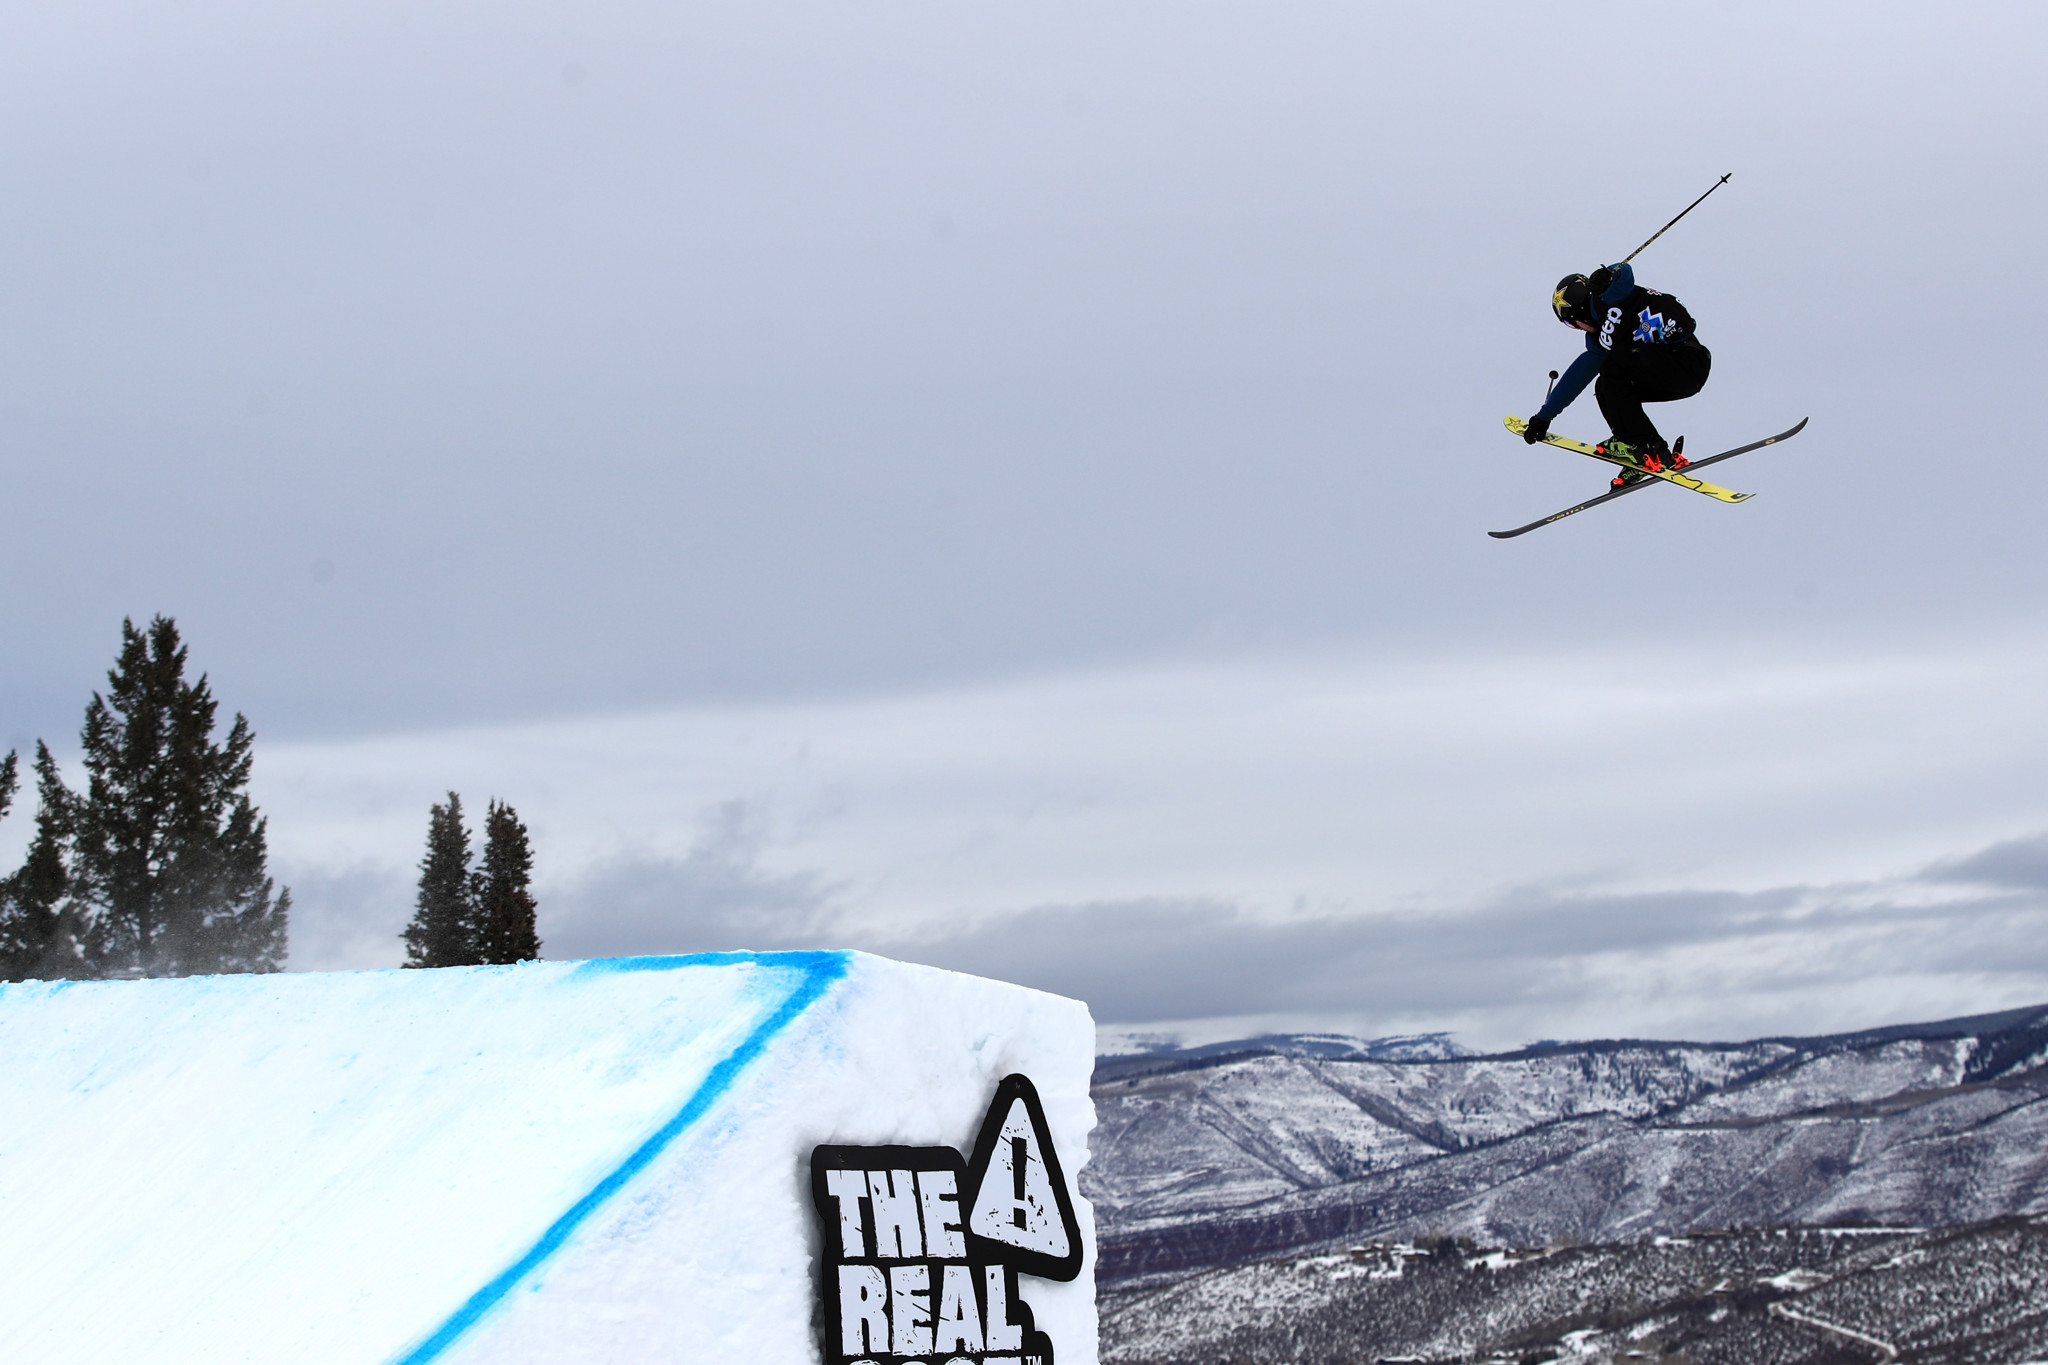 Aspen to host part of FIS Freestyle Ski and Snowboarding World Championships